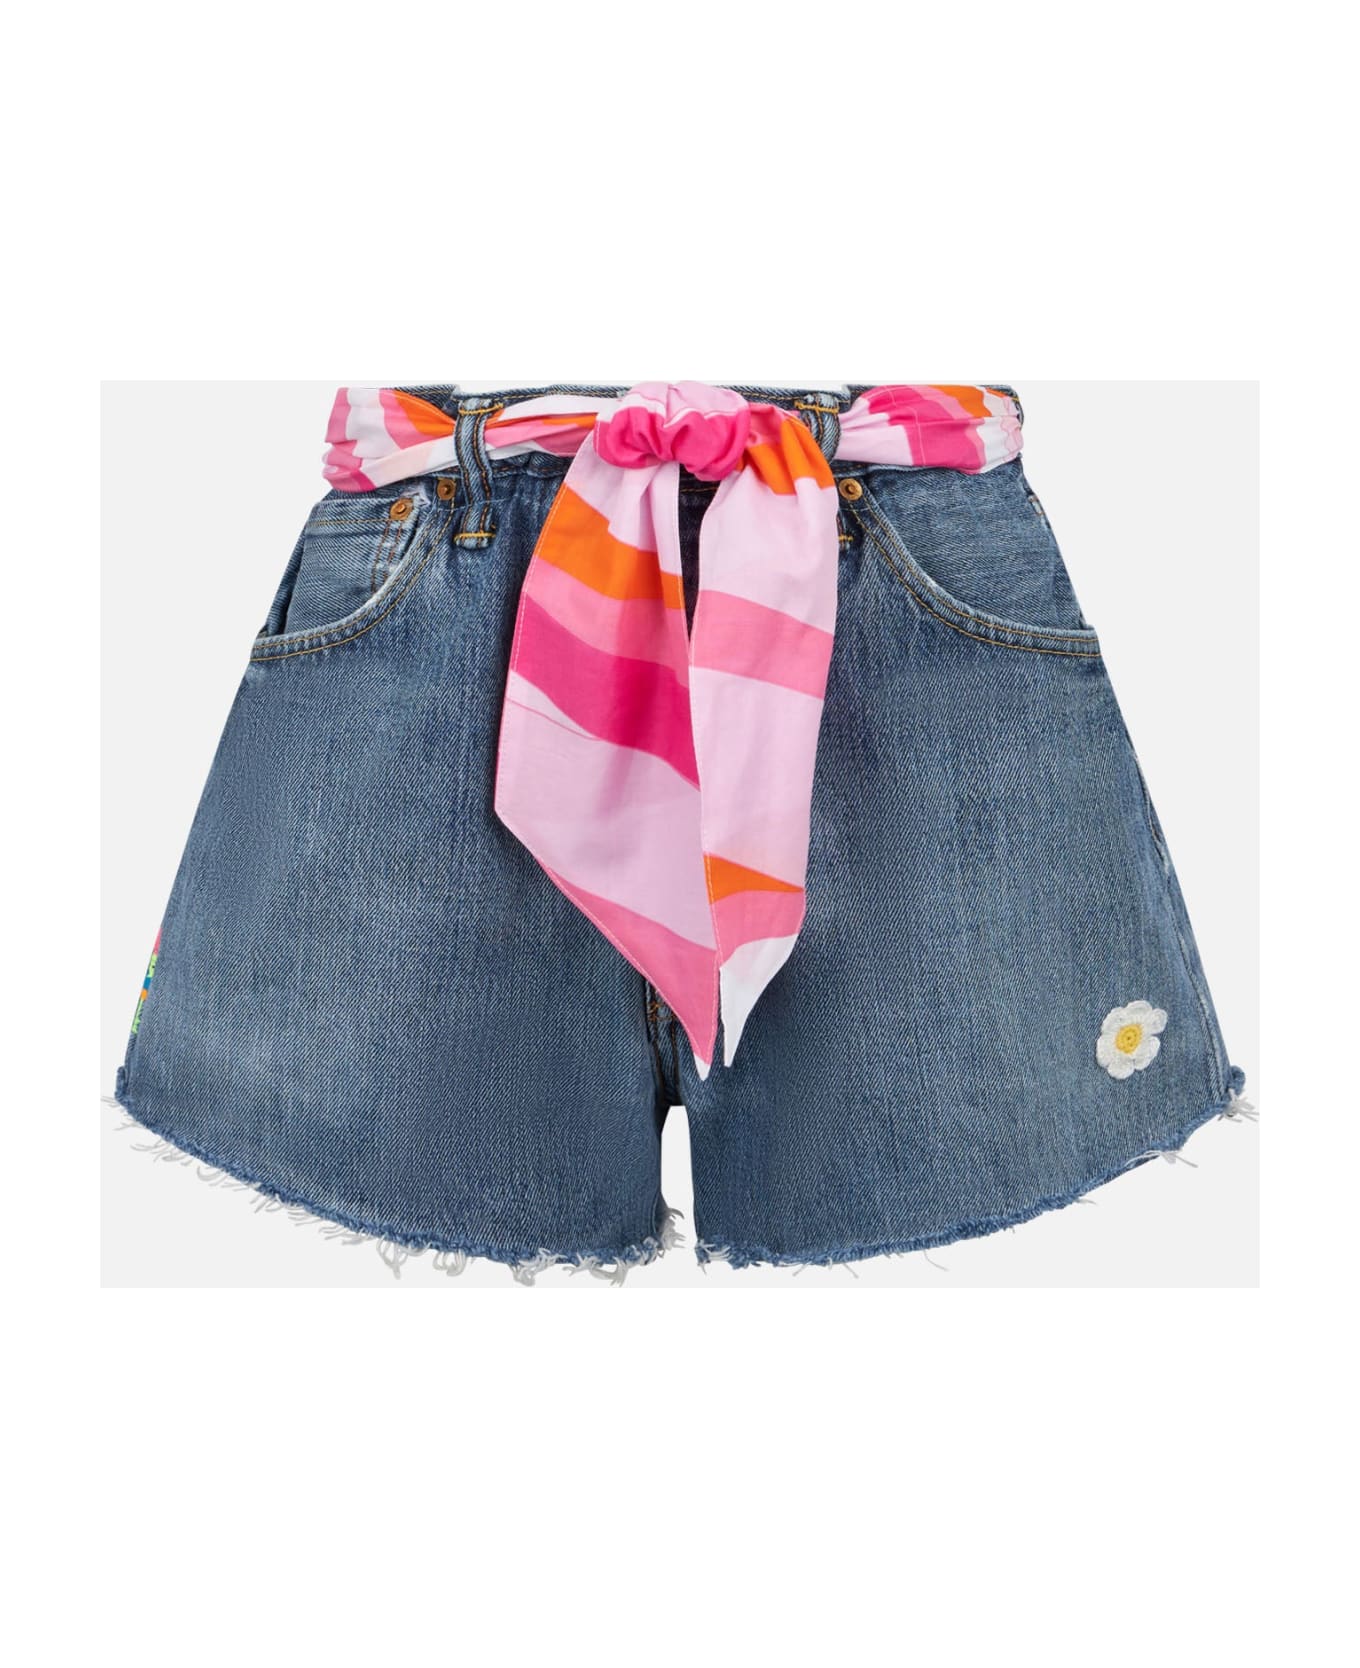 MC2 Saint Barth Woman Upcycled Denim Shorts With Embroidery - PINK